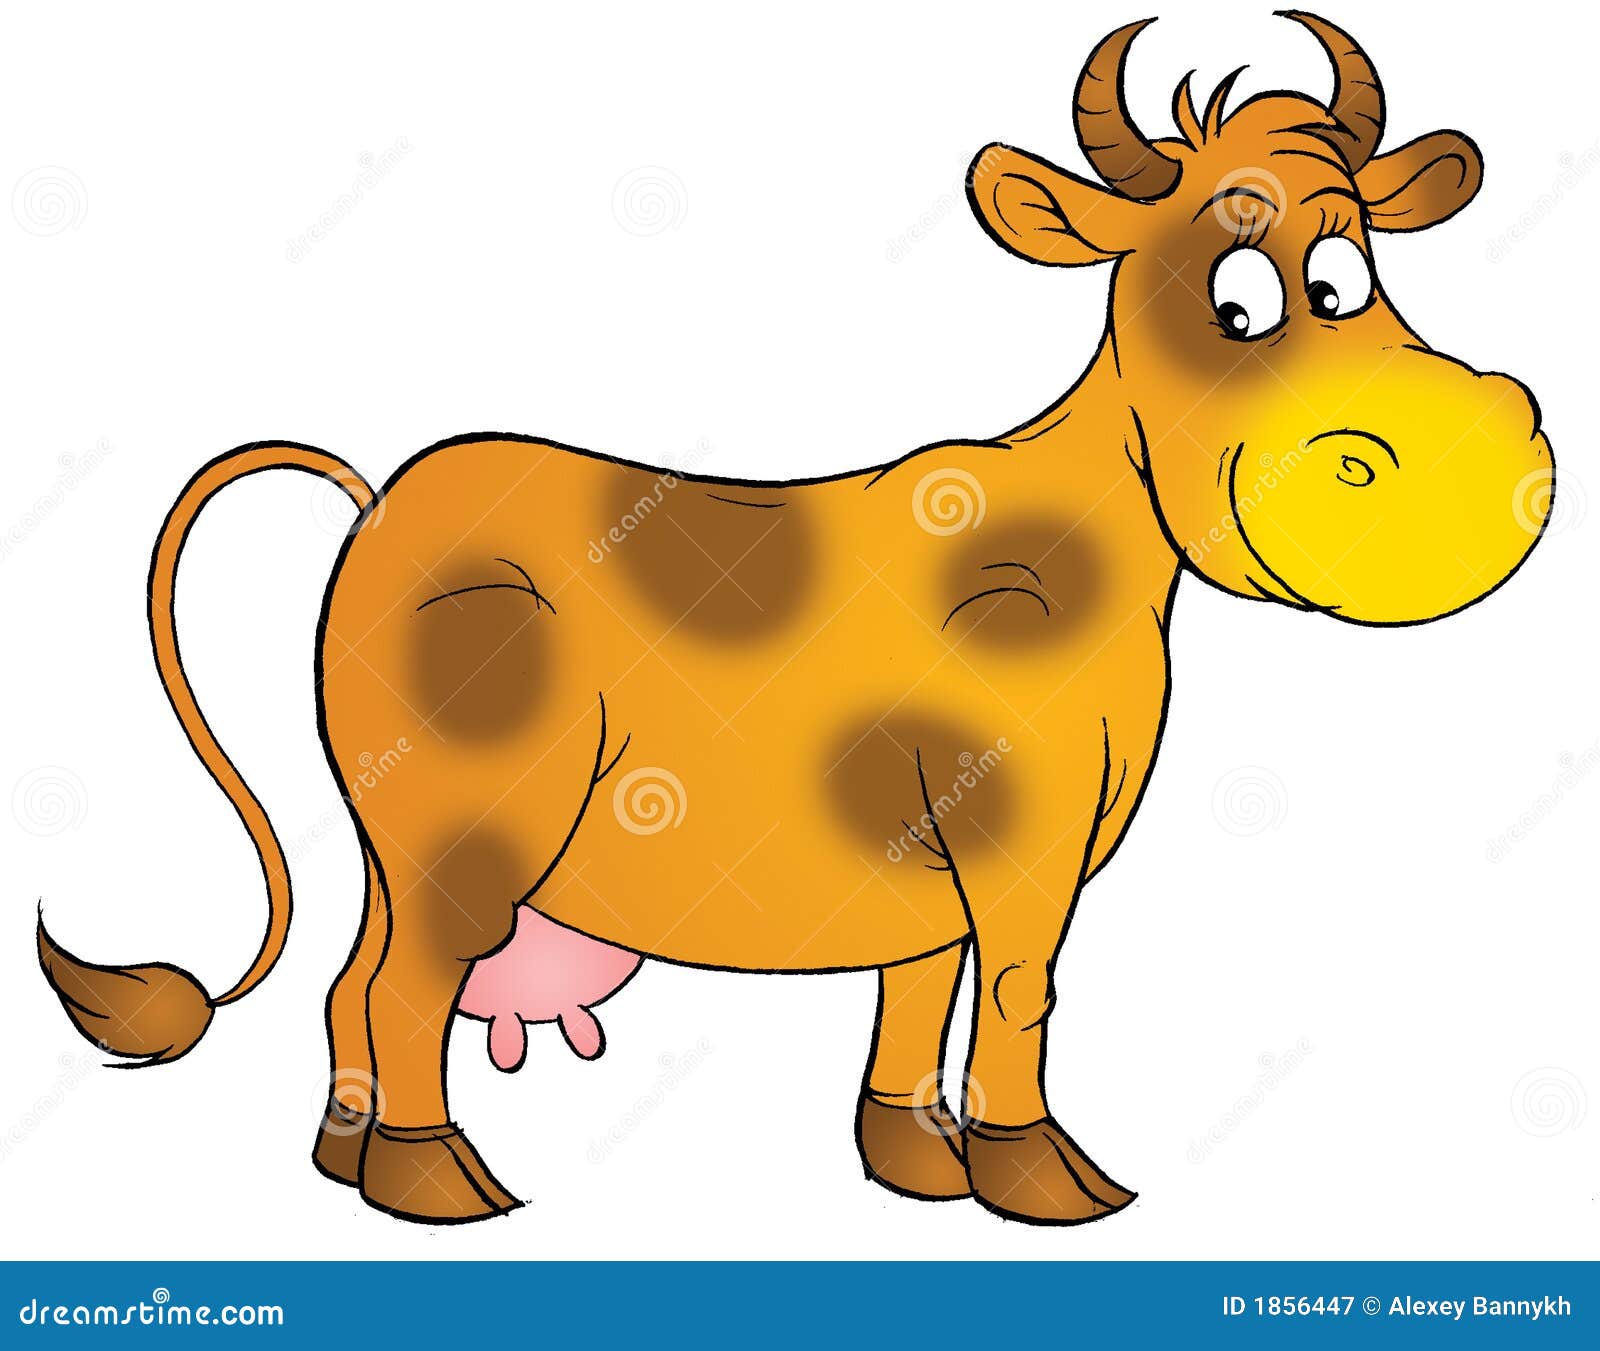 cow clip art free download - photo #33